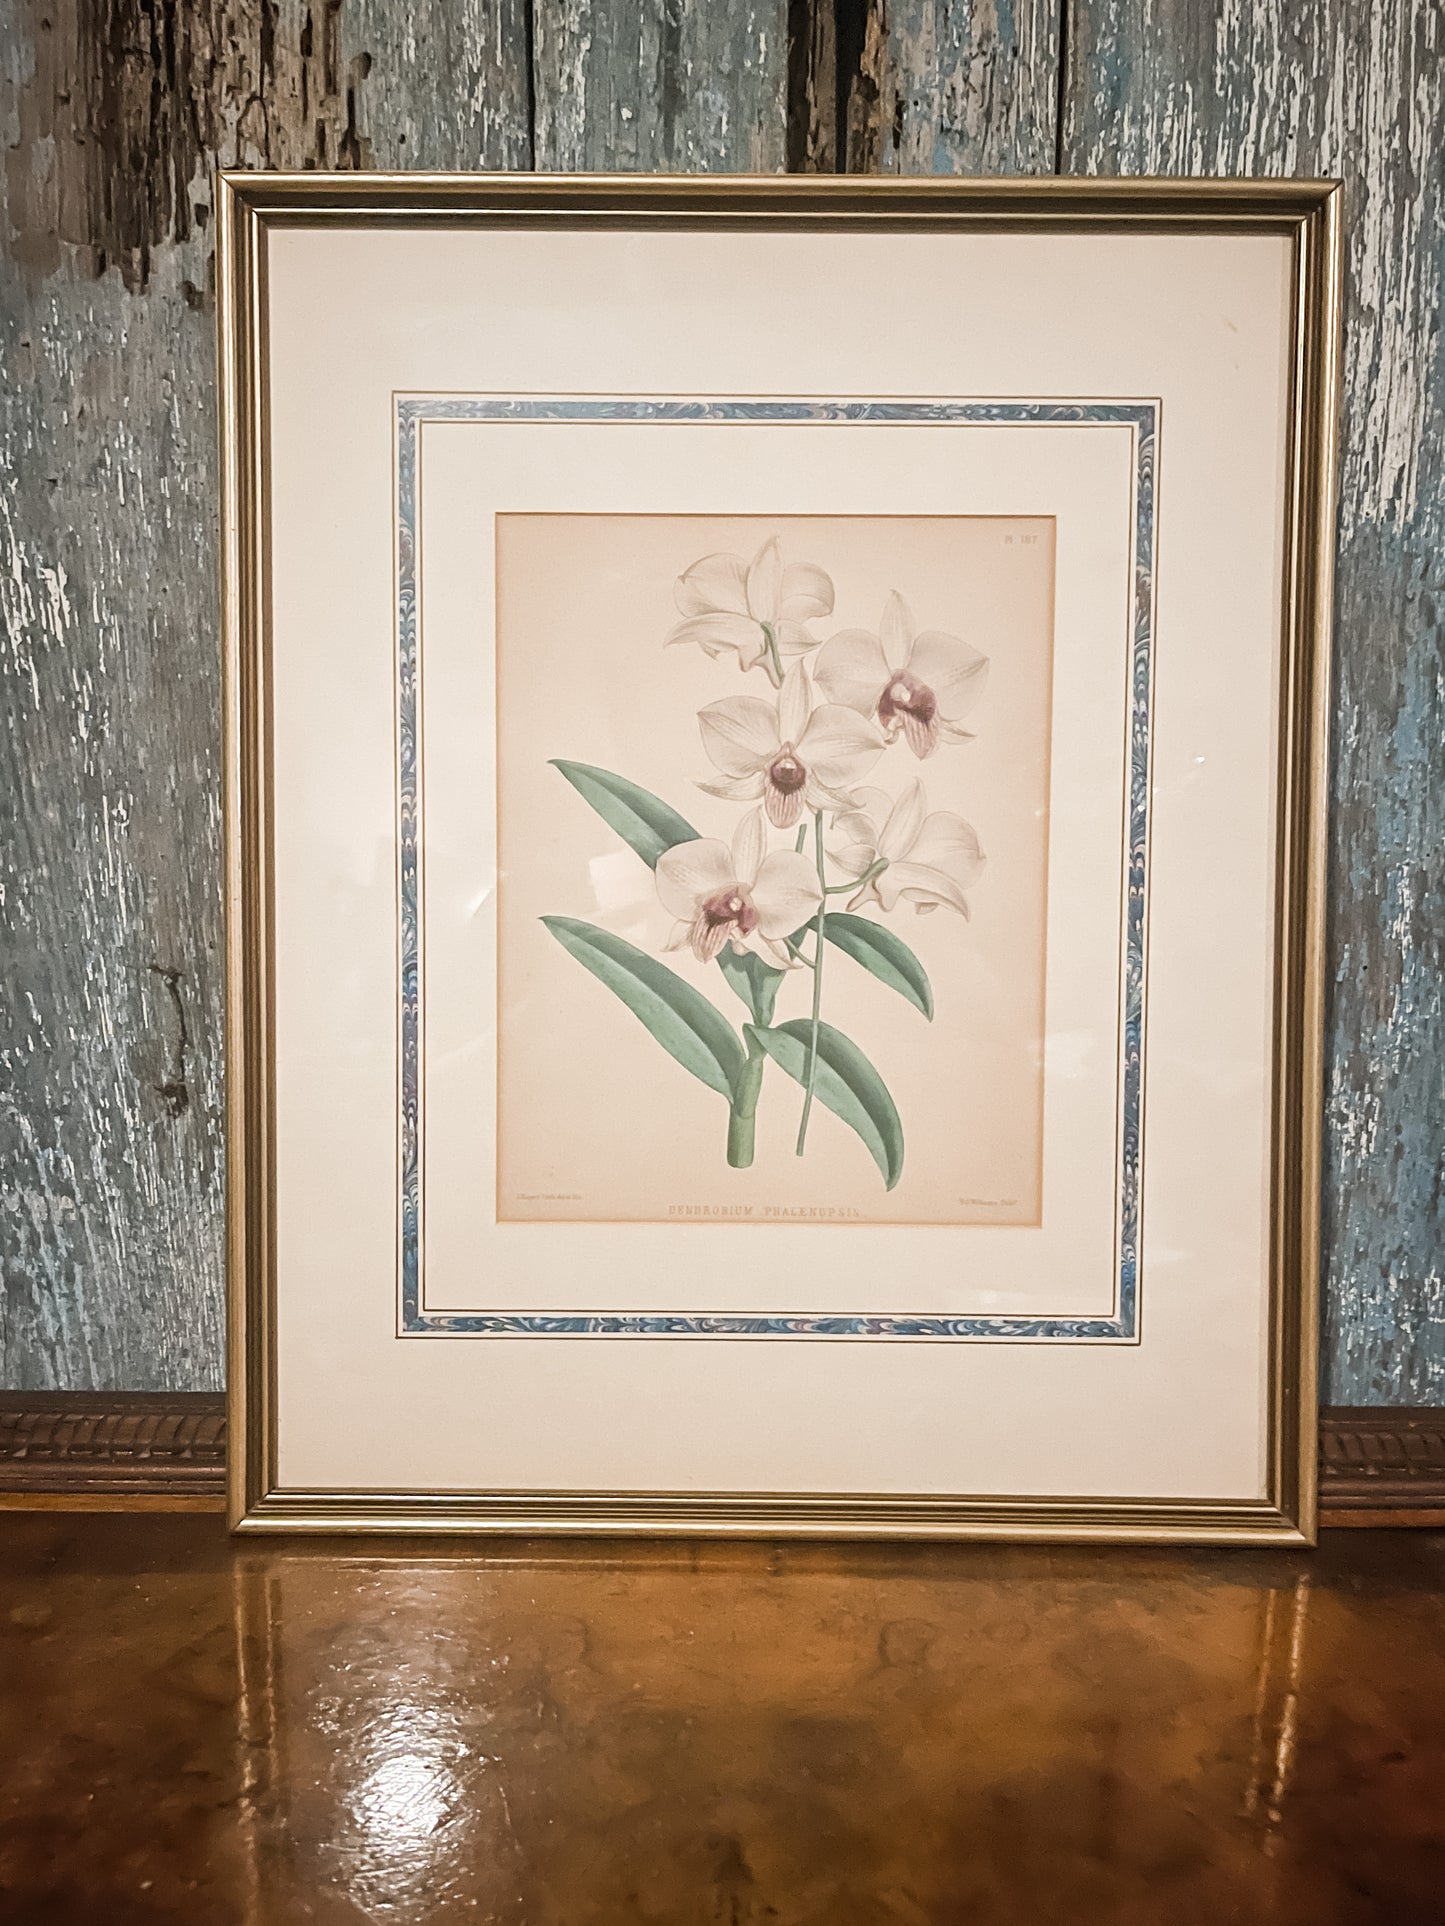 Antique Orchid Lithographs, Antique Pages from The Orchid Album, Matted and Framed, London